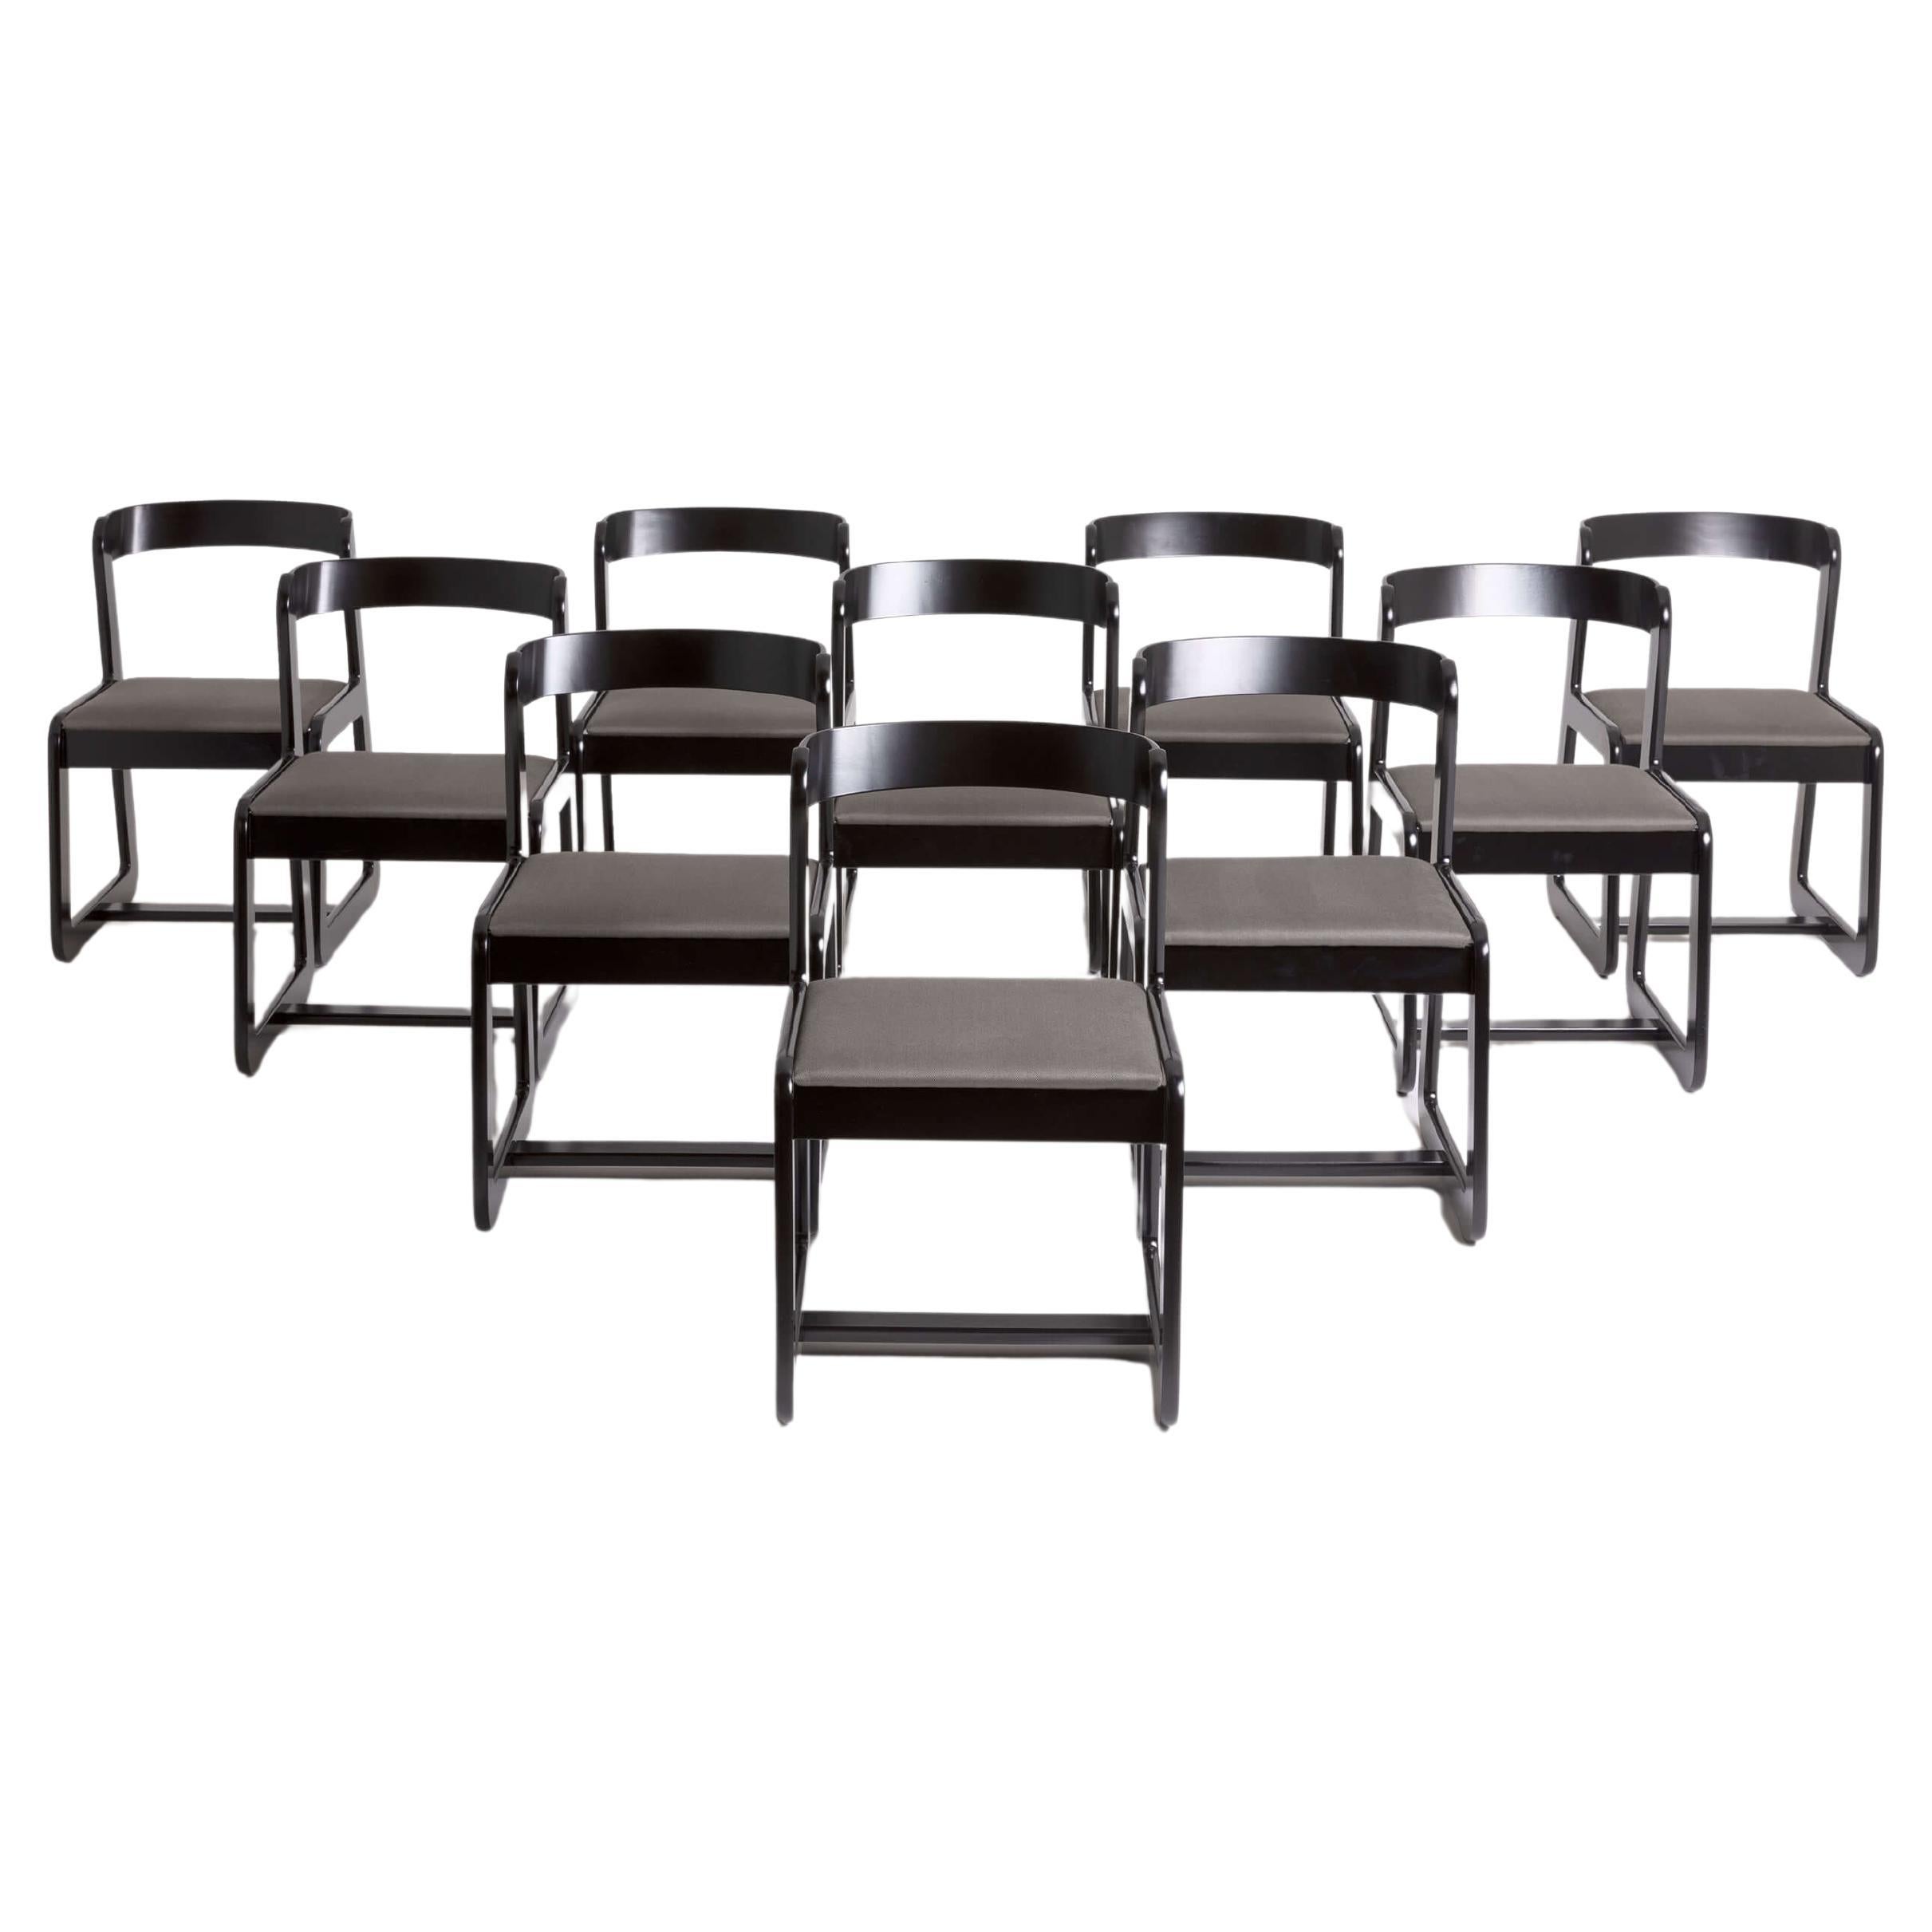 Ten Dining Chairs for Mario Sabot: Black Lacquer, circa 1970 For Sale